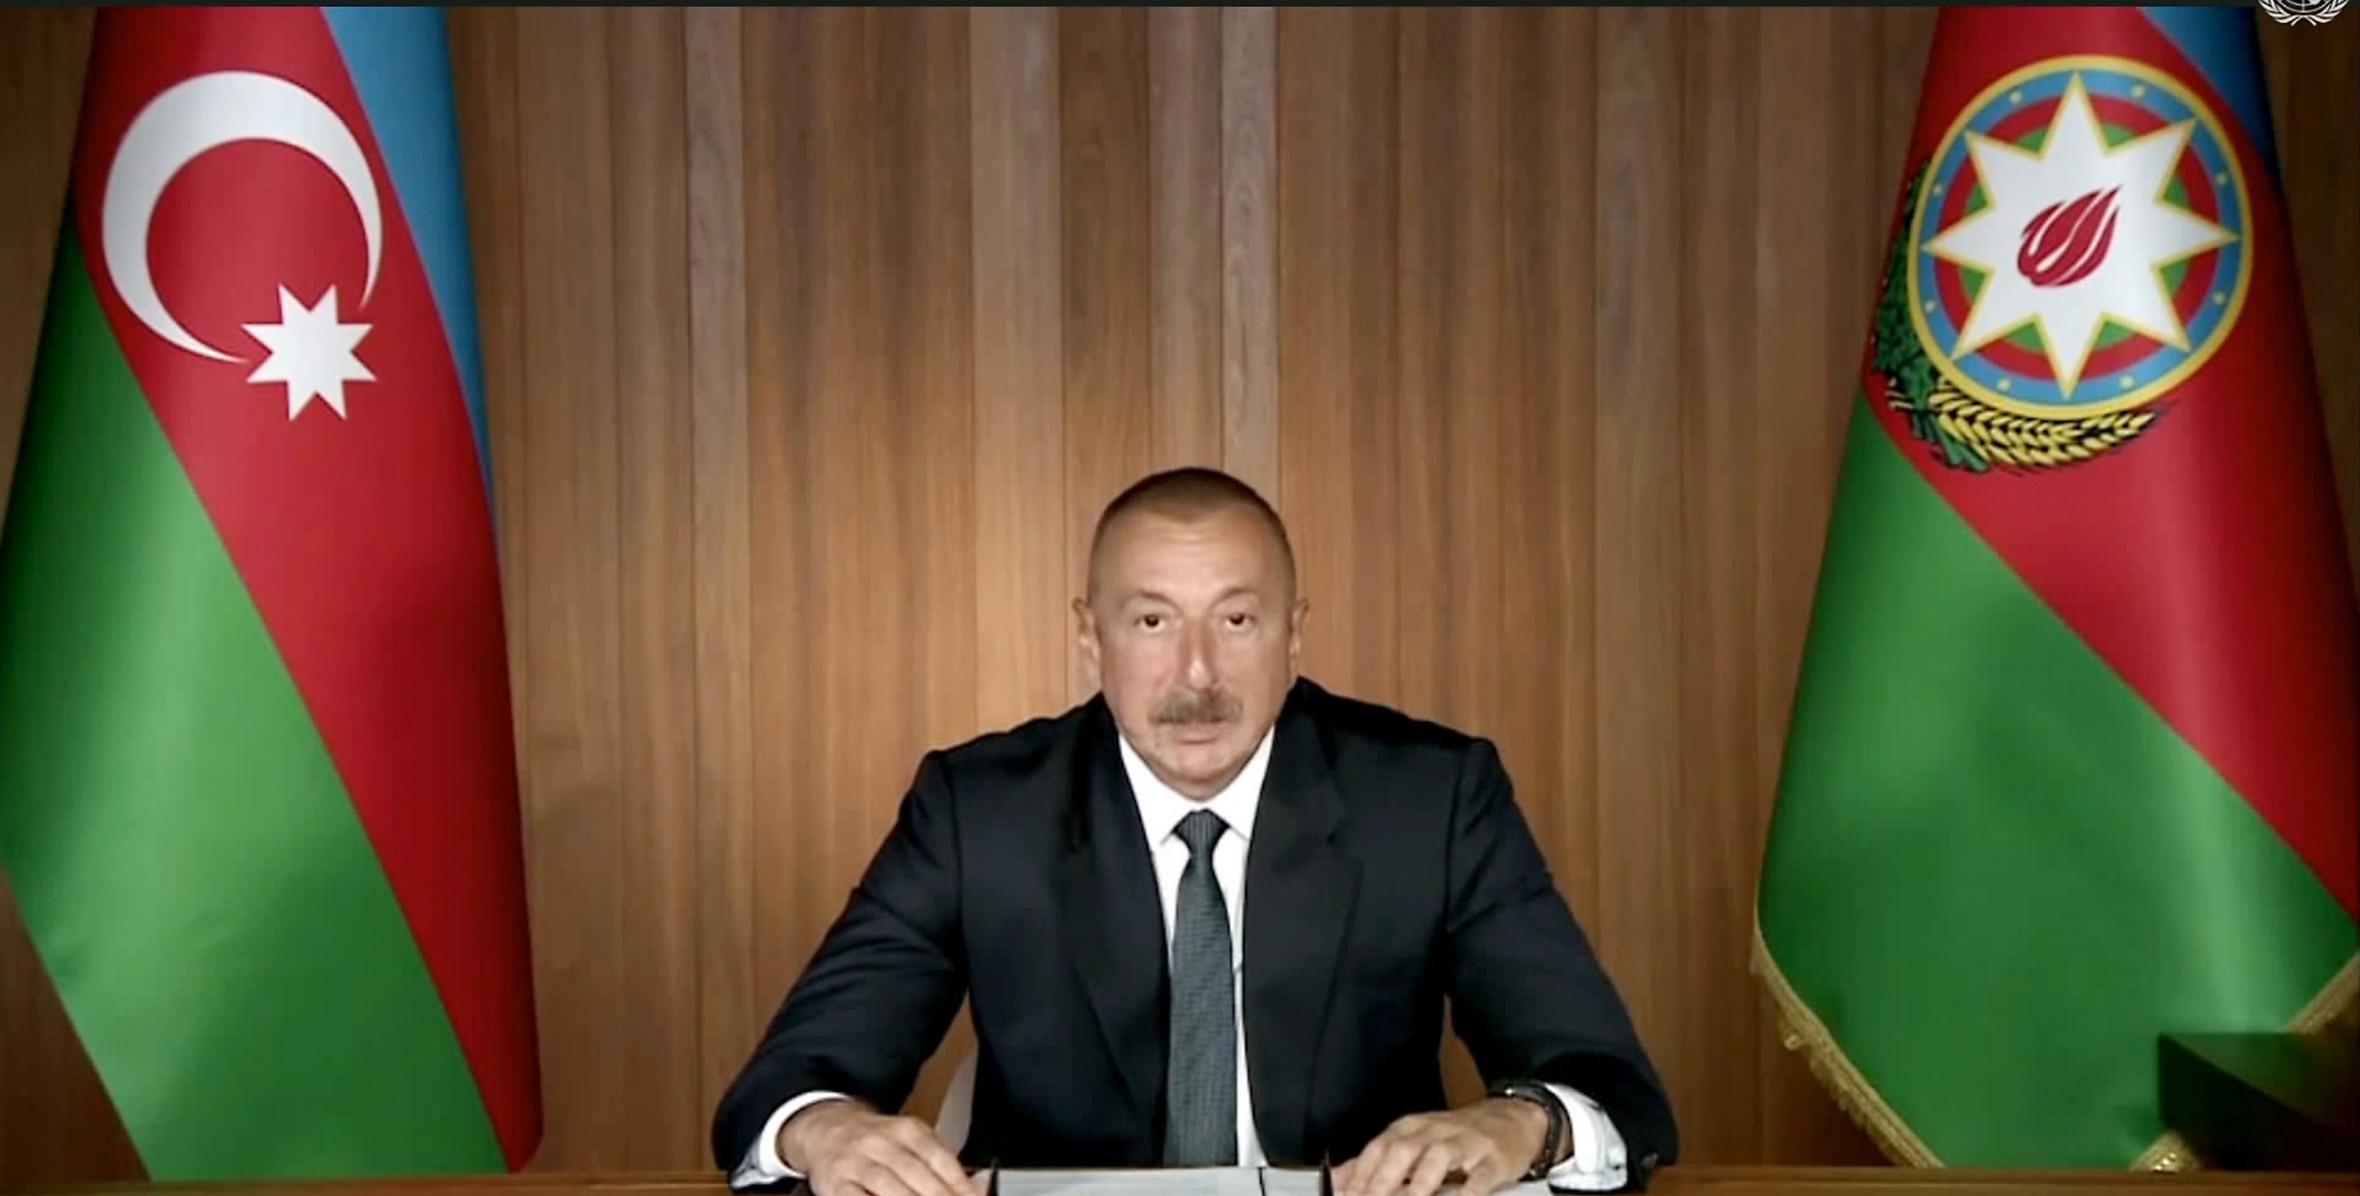 Ilham Aliyev delivered a speech at general debates of 75th session of United Nations General Assembly in a video format